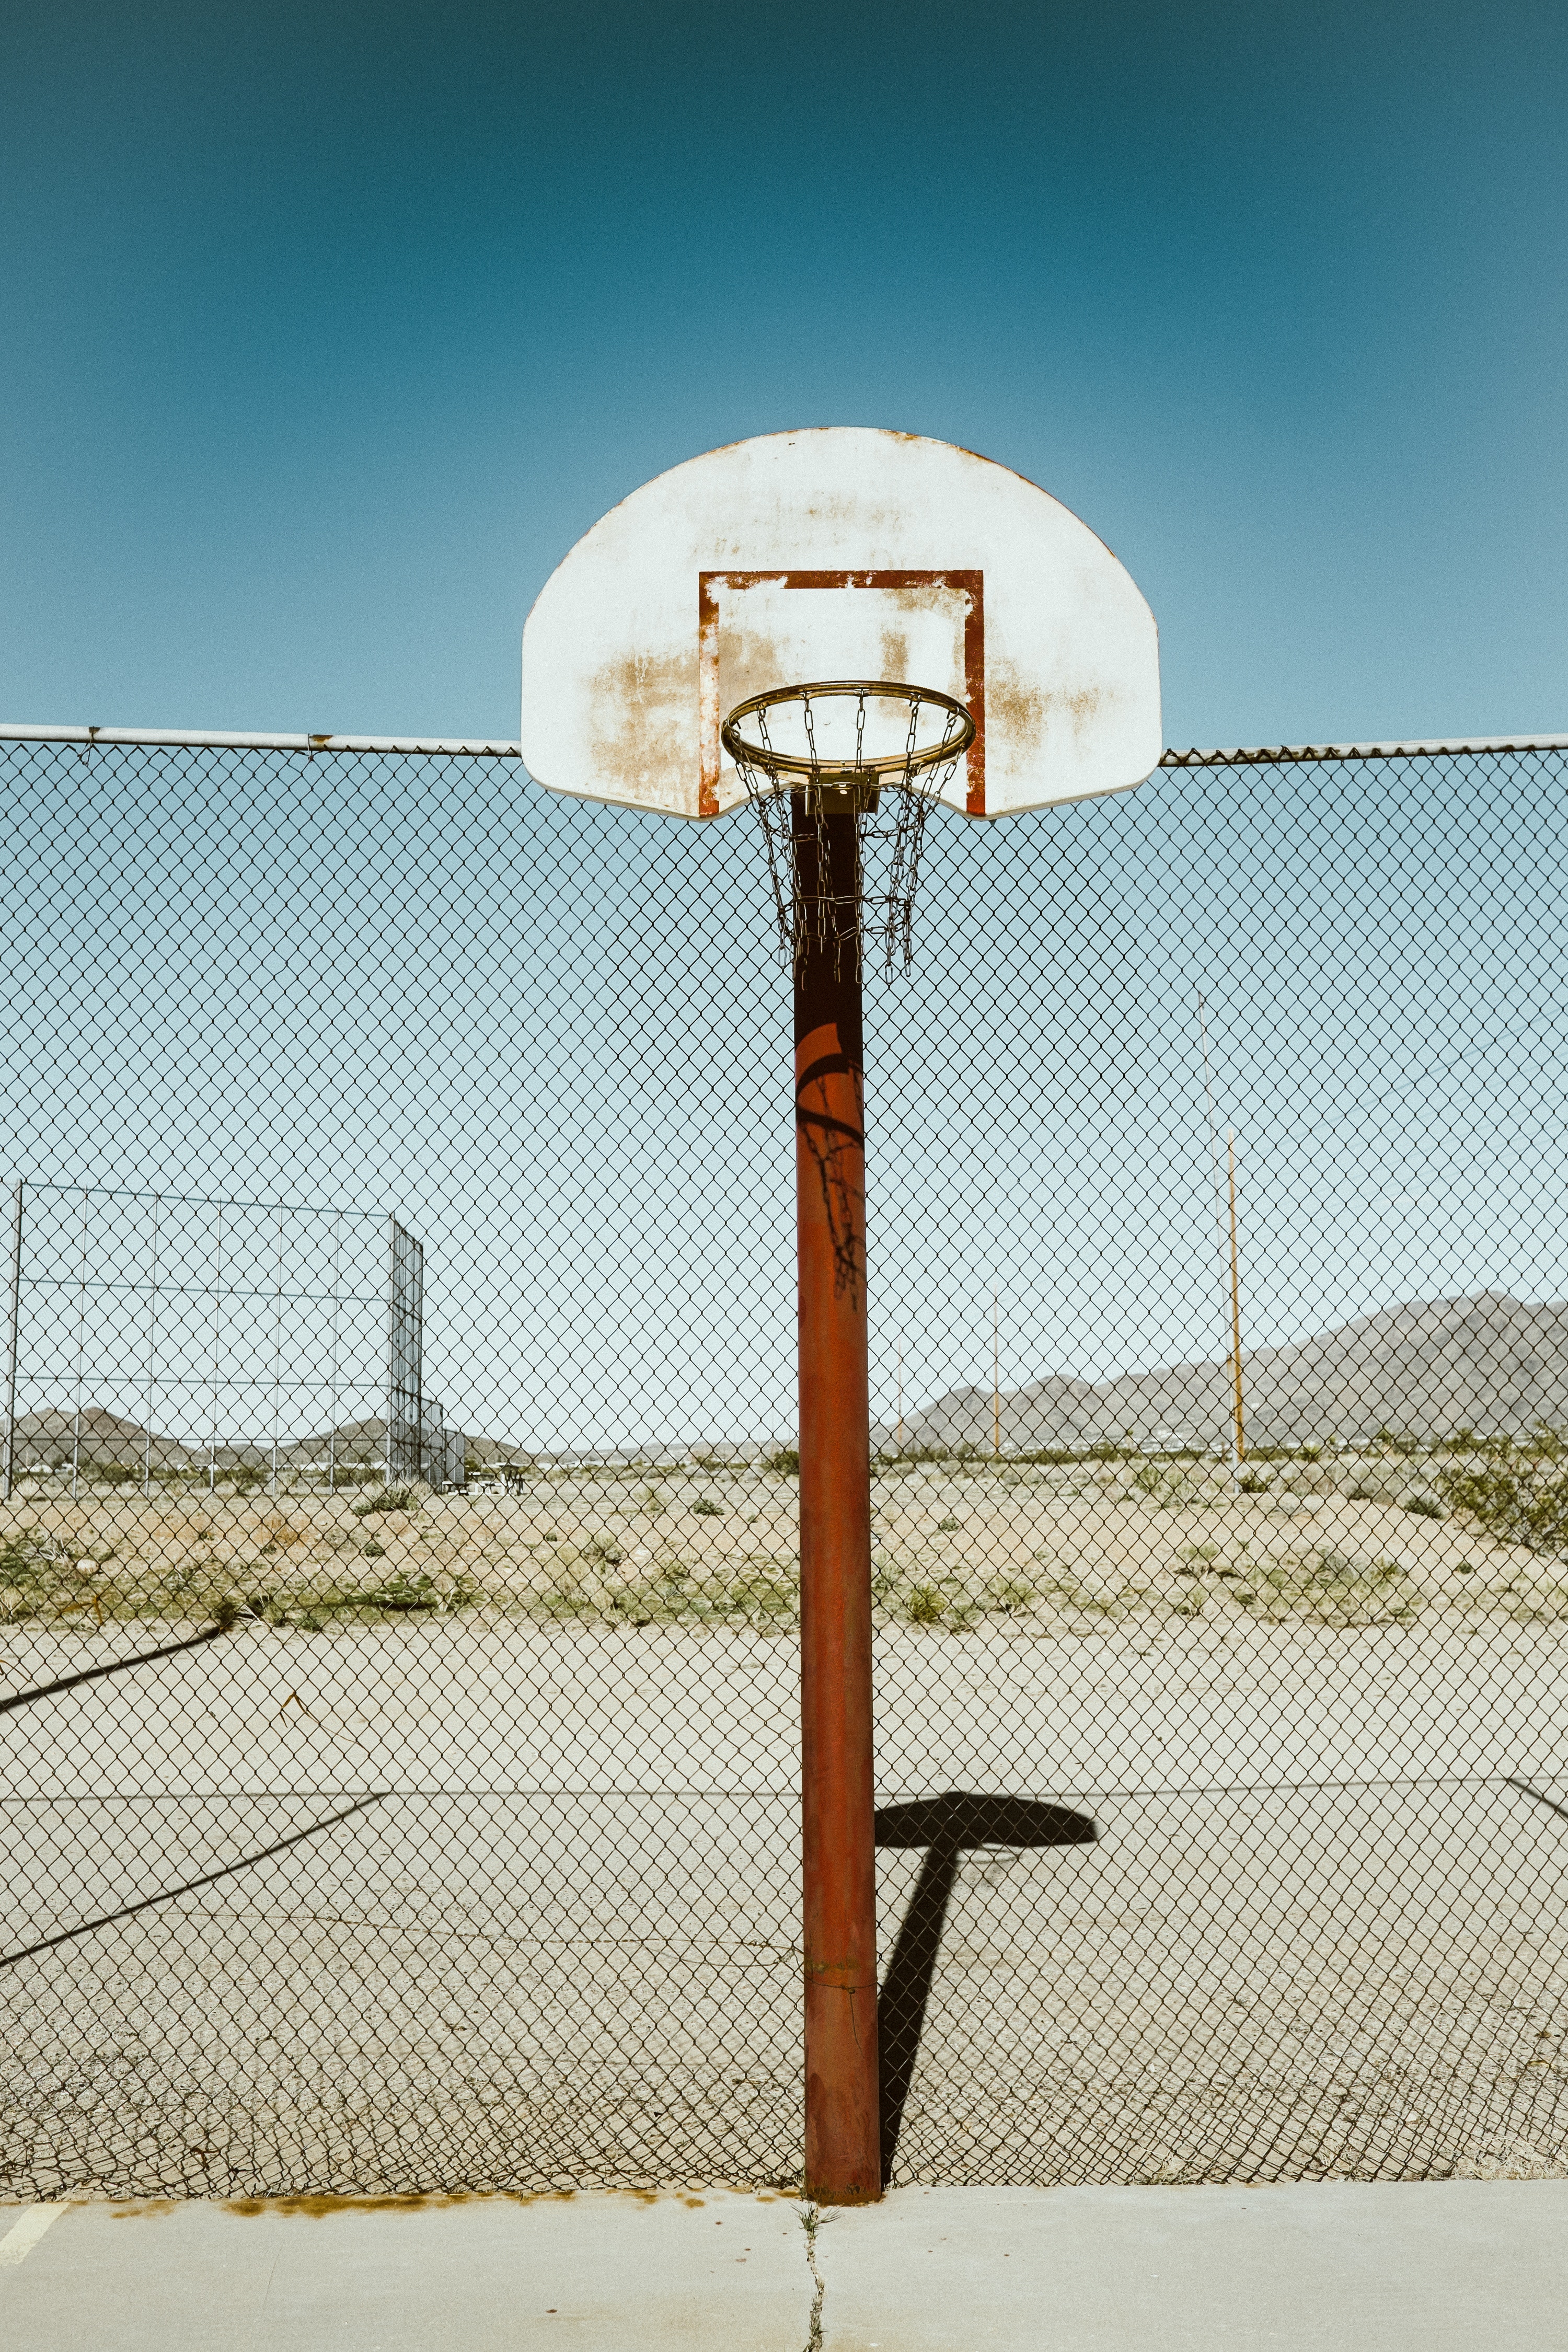 Images & Pictures basketball court, fence, grid, basketball playground Old